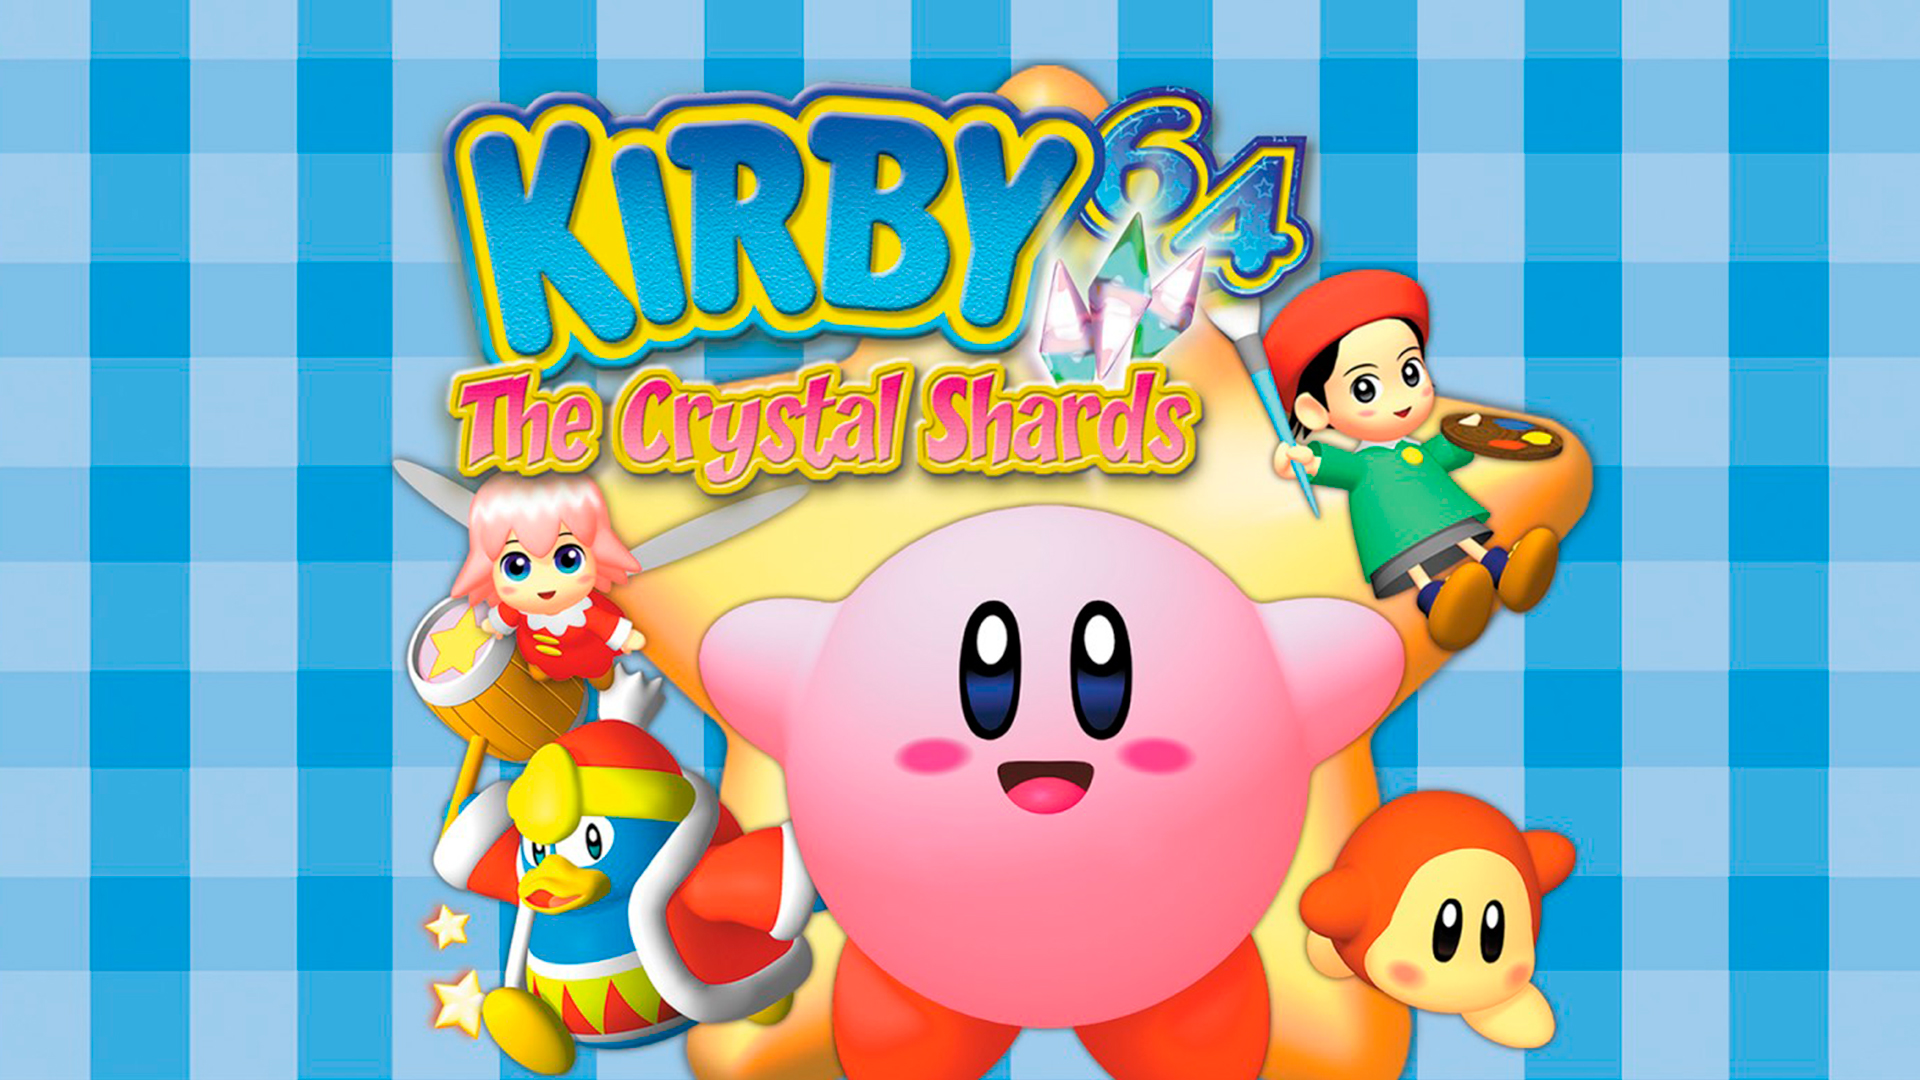 Kirby 64 The Crystal Shards - HD Wallpaper 